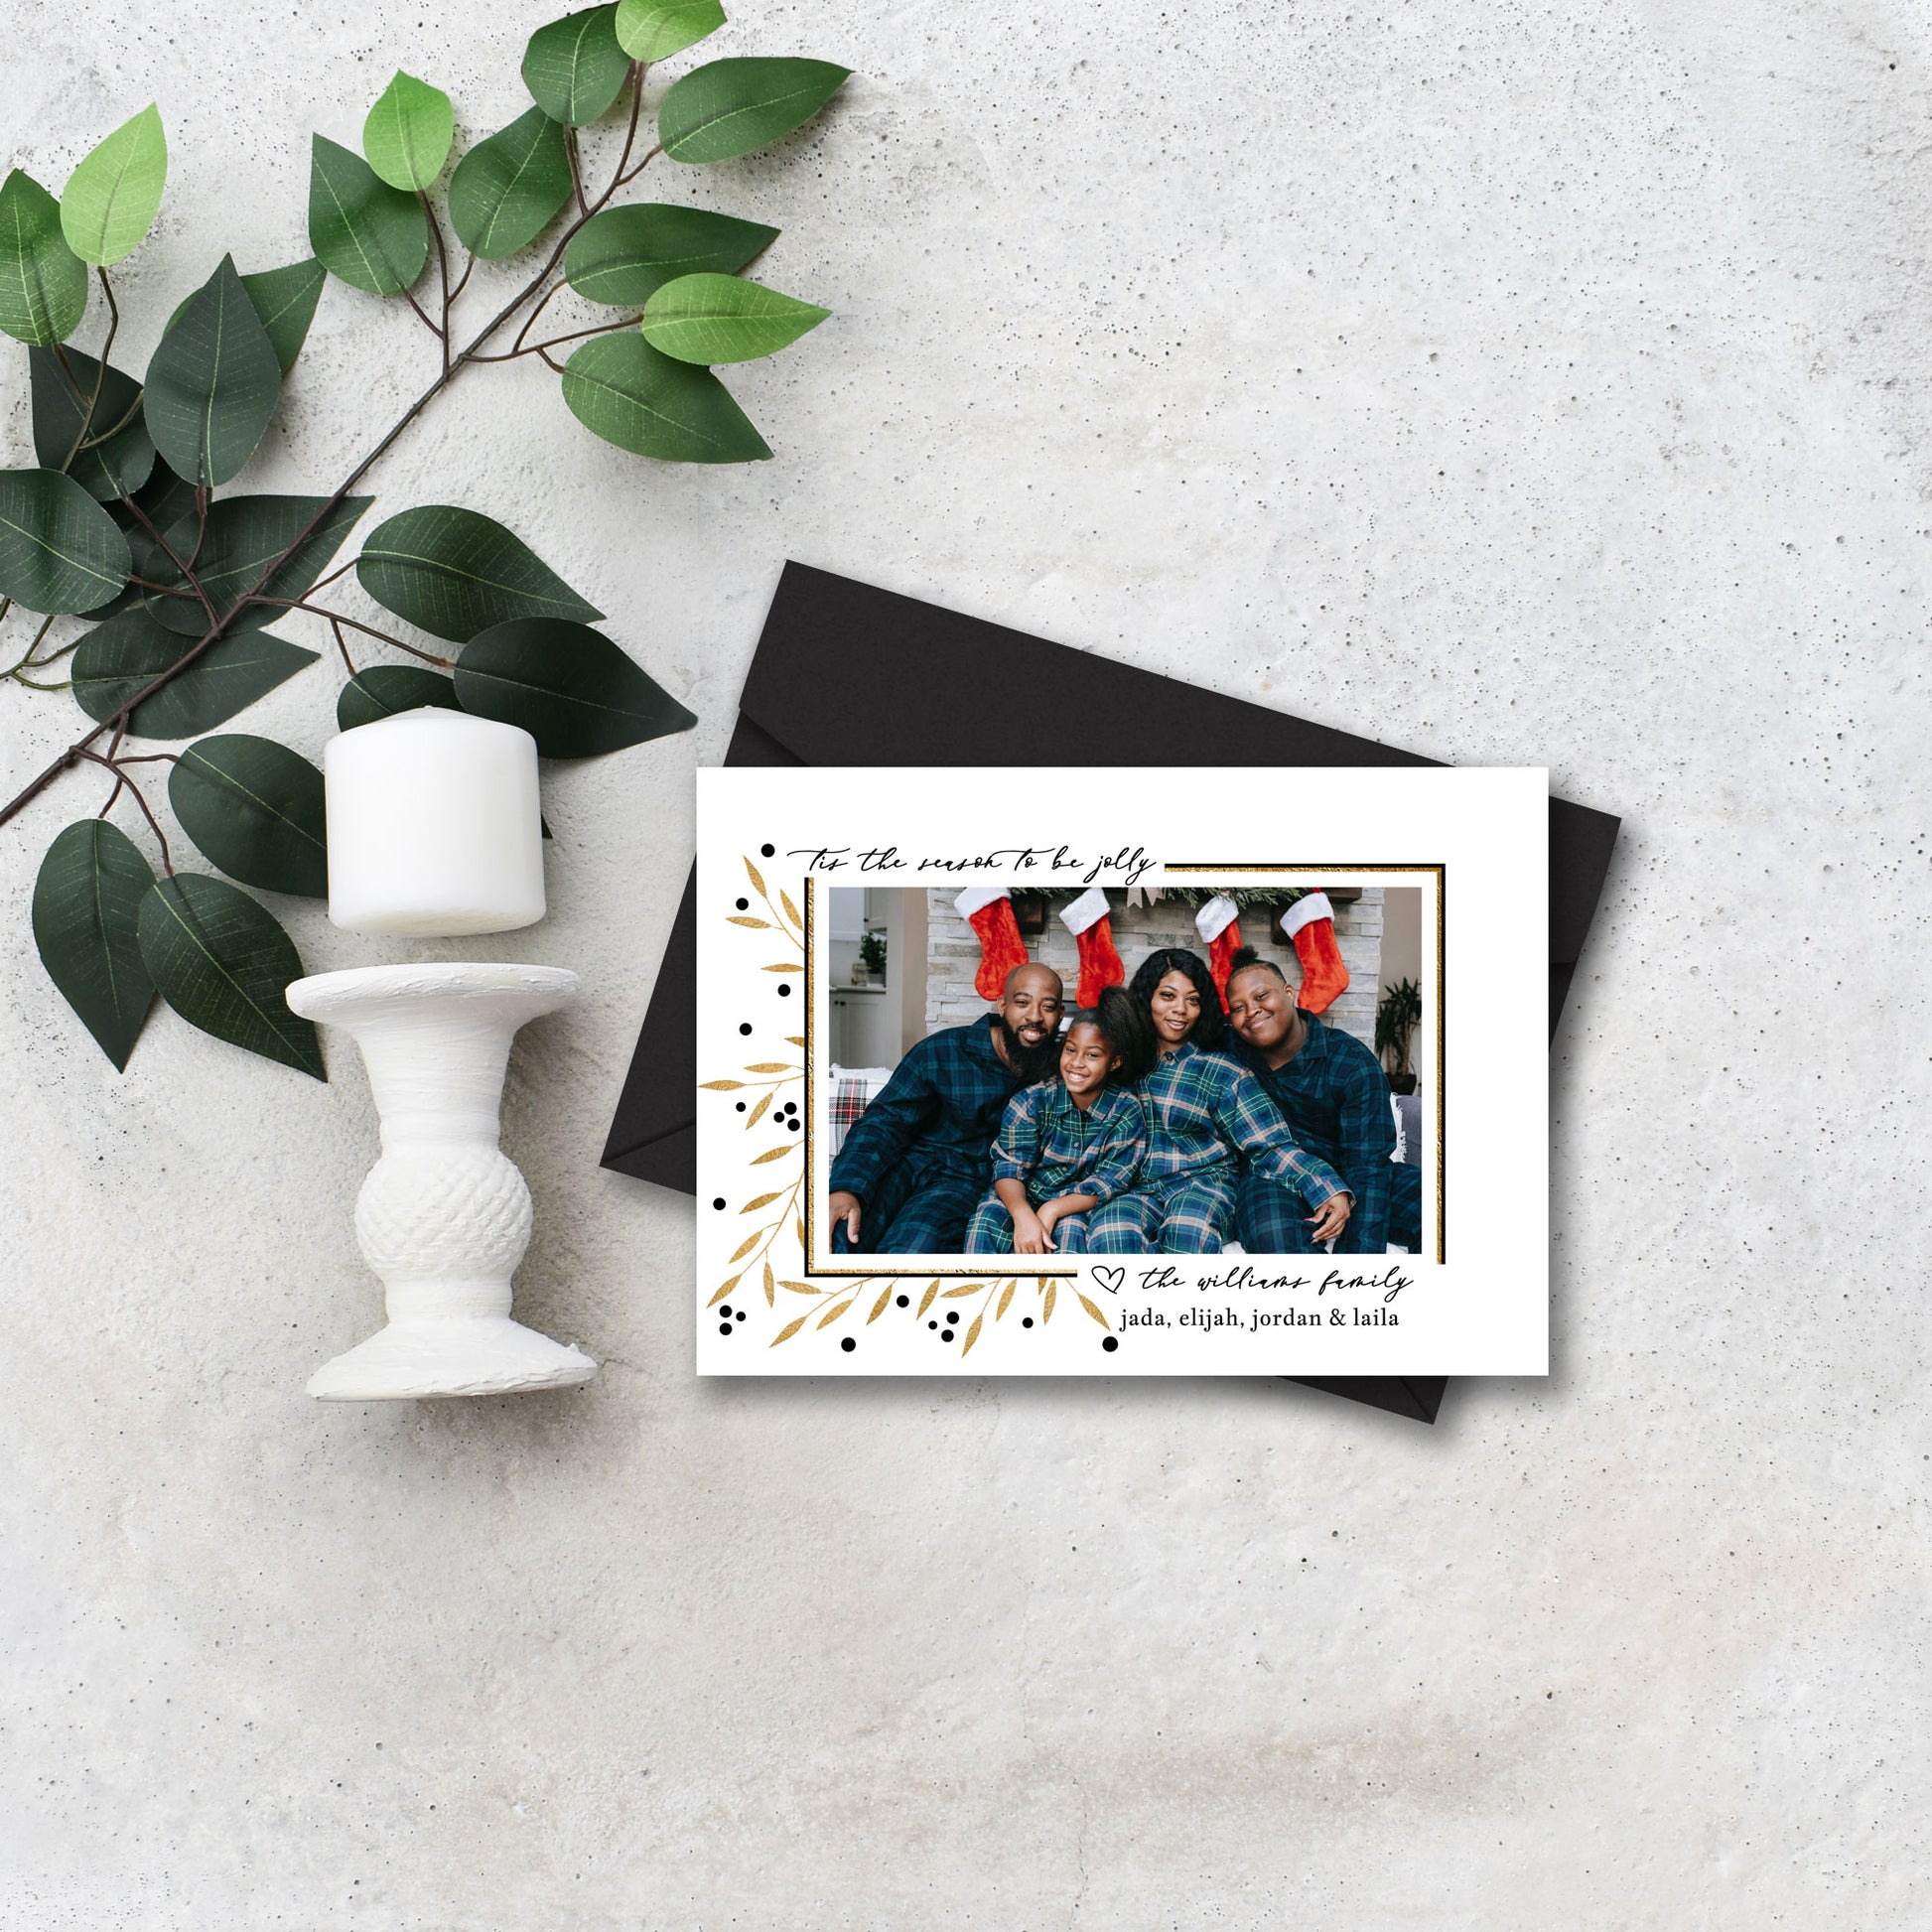 Easy DIY Tis the Season Holiday Photo Card Black and Gold Christmas Card on a Budget